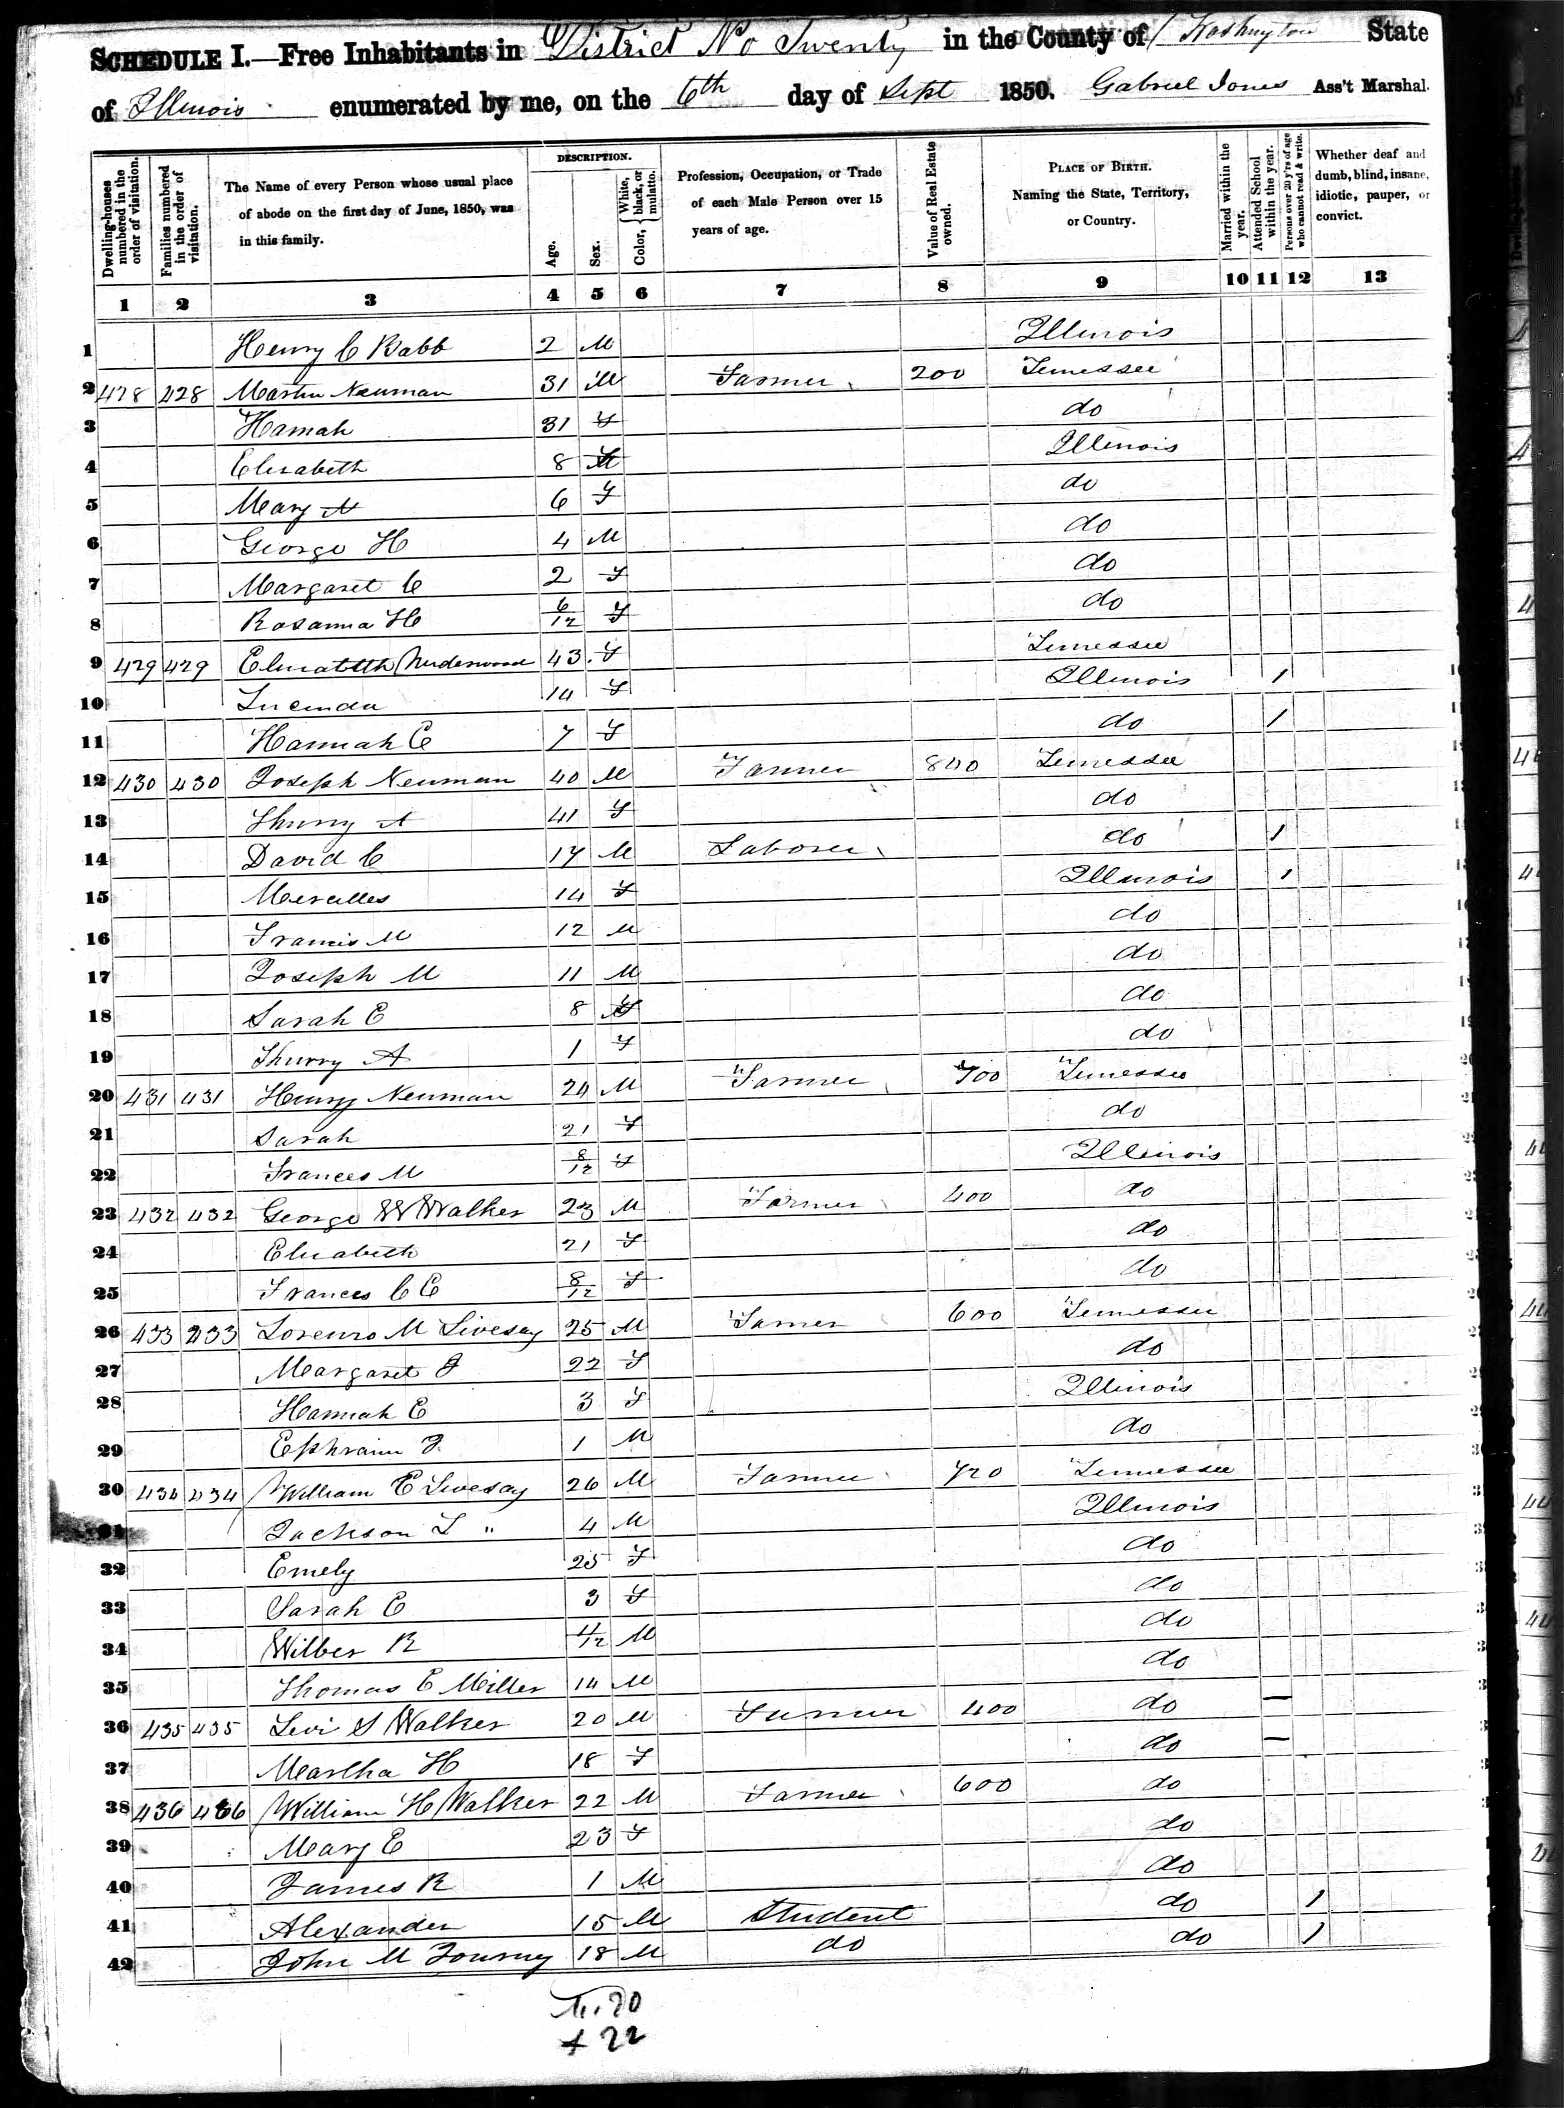 John M. Journey, 1850 Washington County, Illinois, census, in the home of William H. Walker